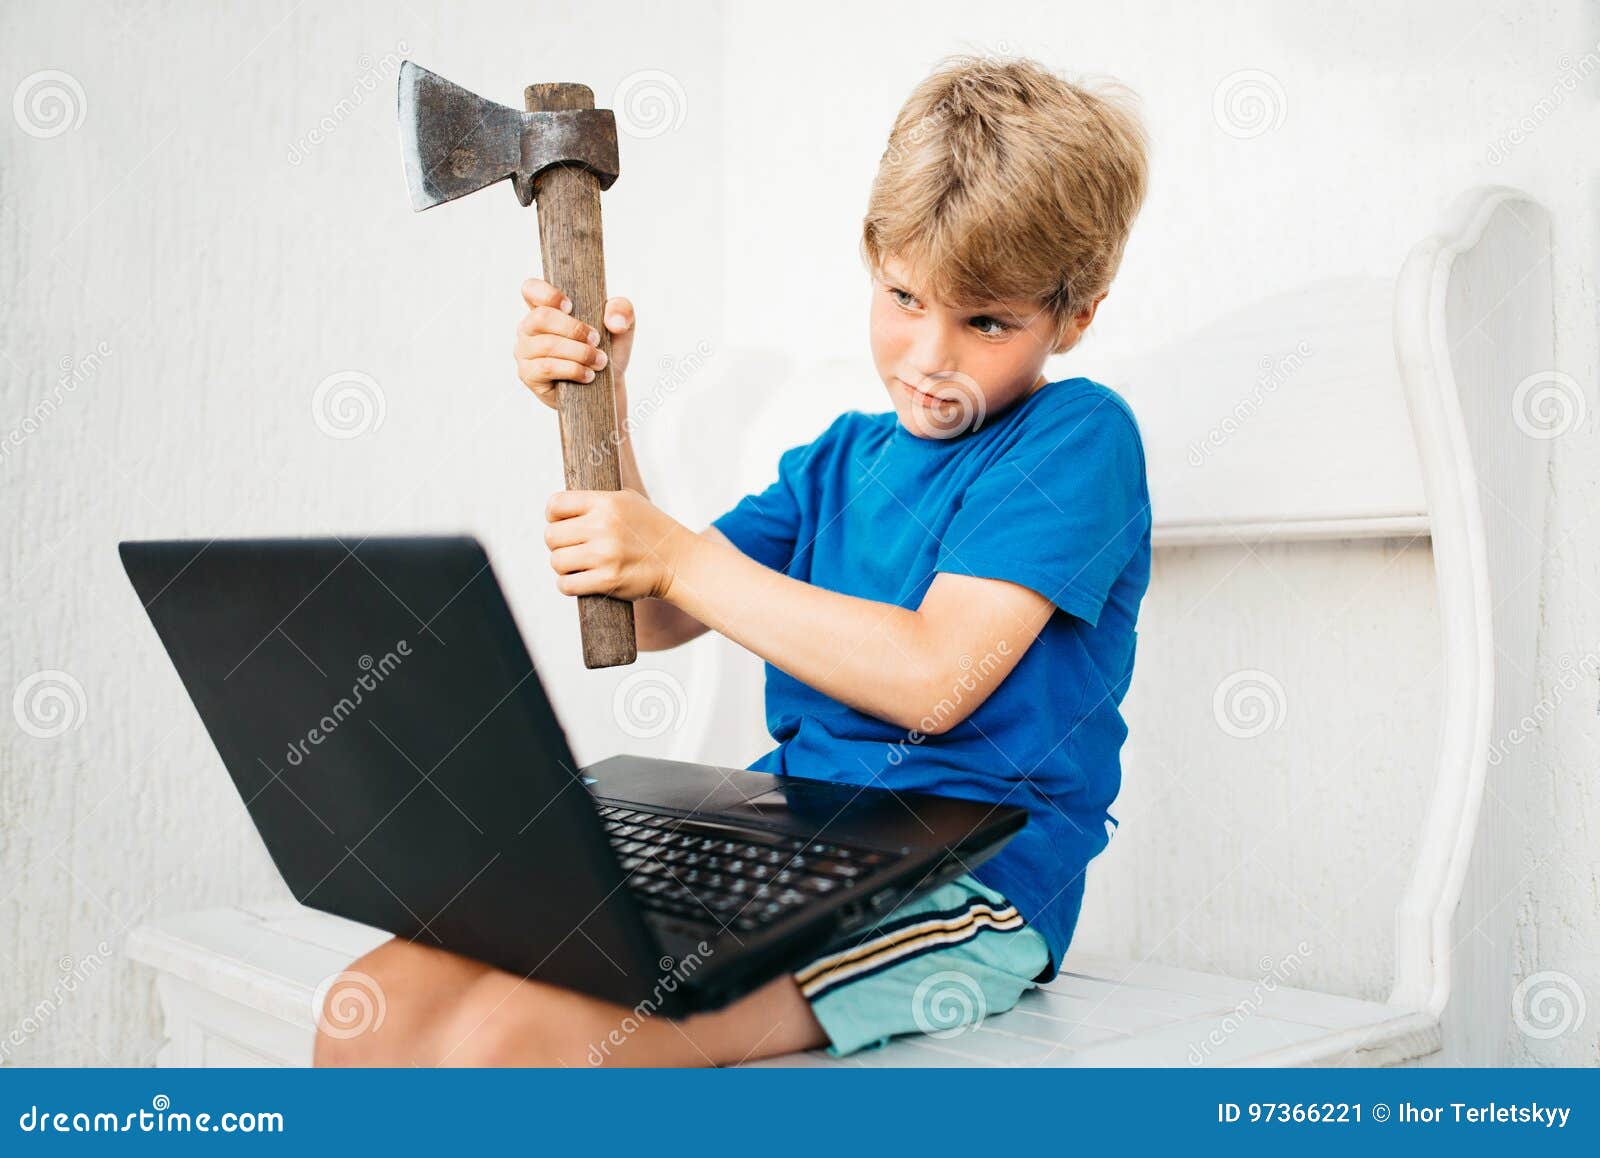 a boy with an ax and a laptop